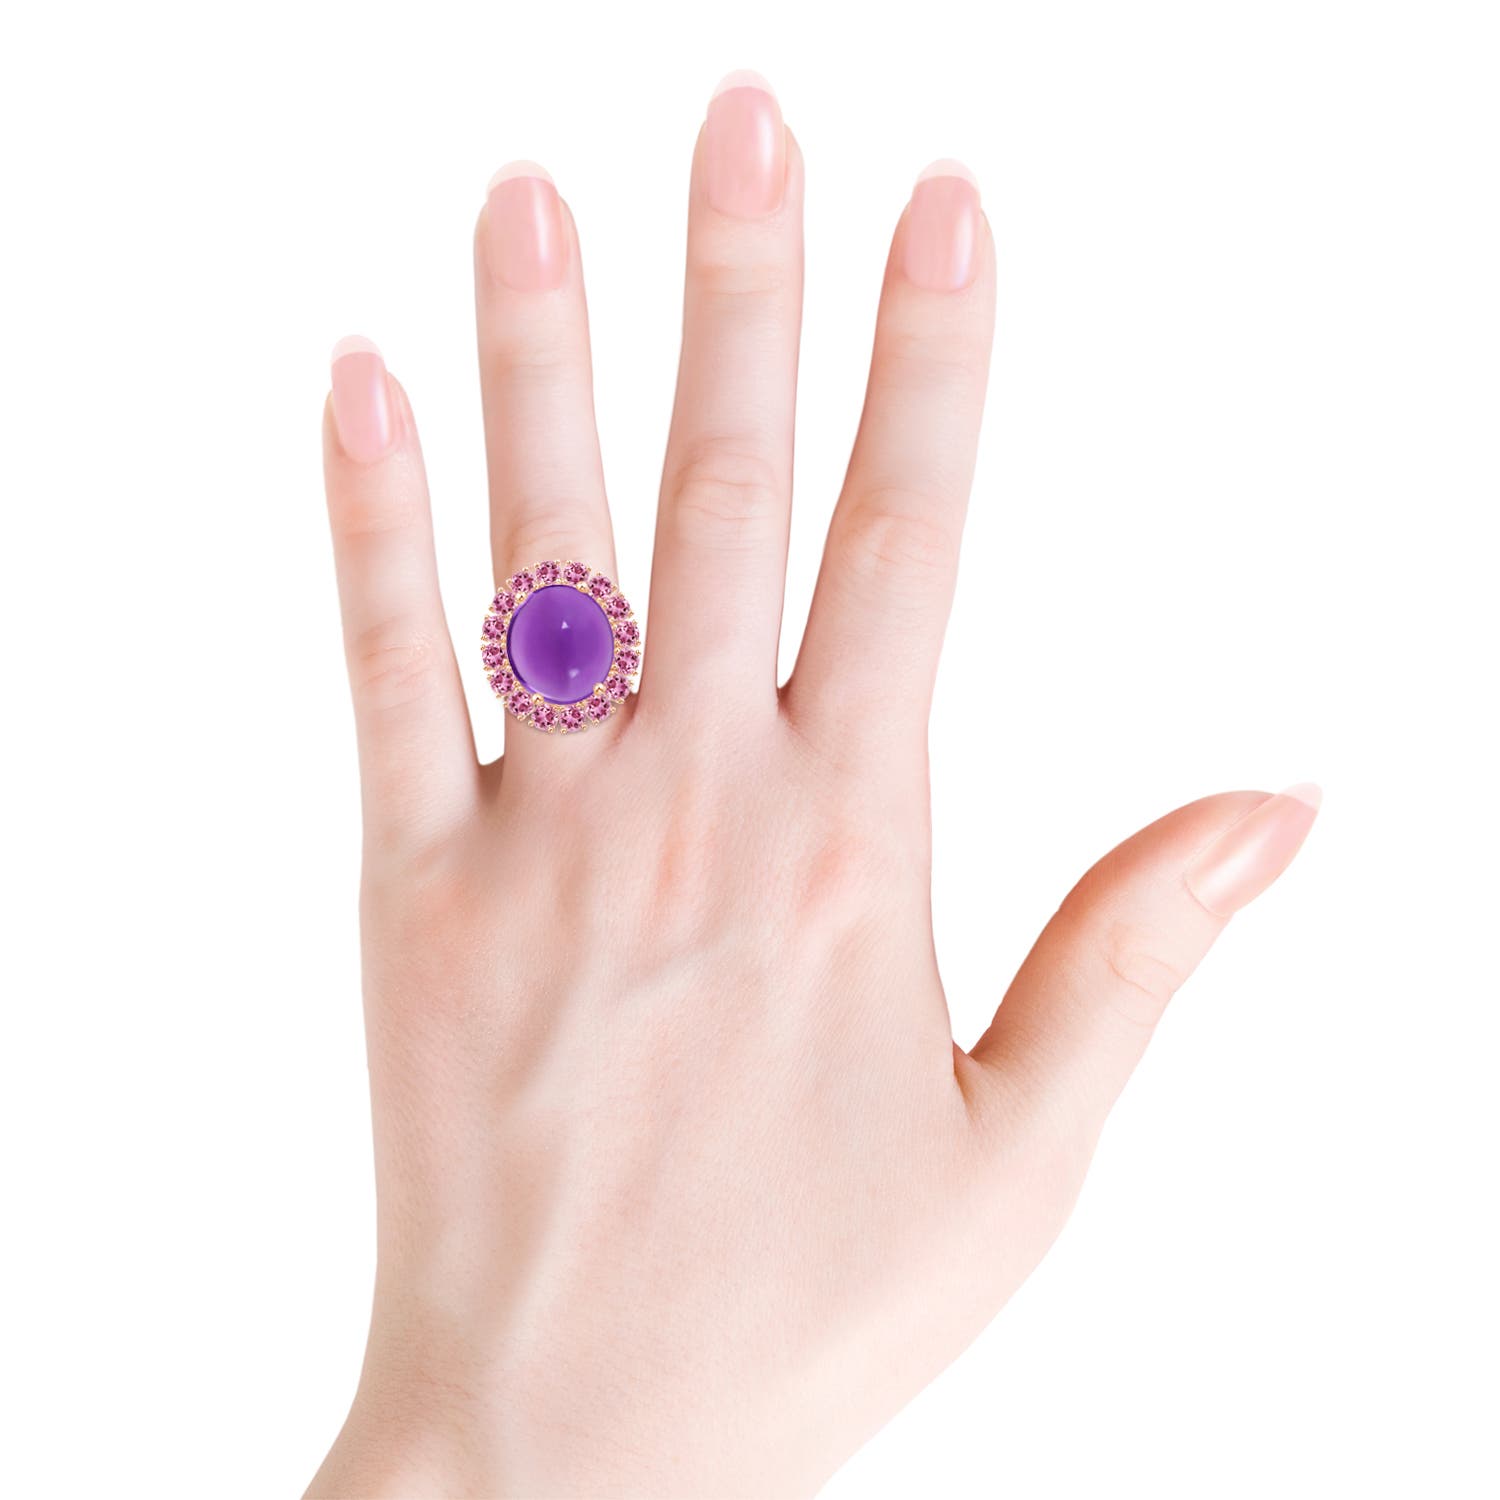 AAA - Amethyst / 13.56 CT / 14 KT Rose Gold